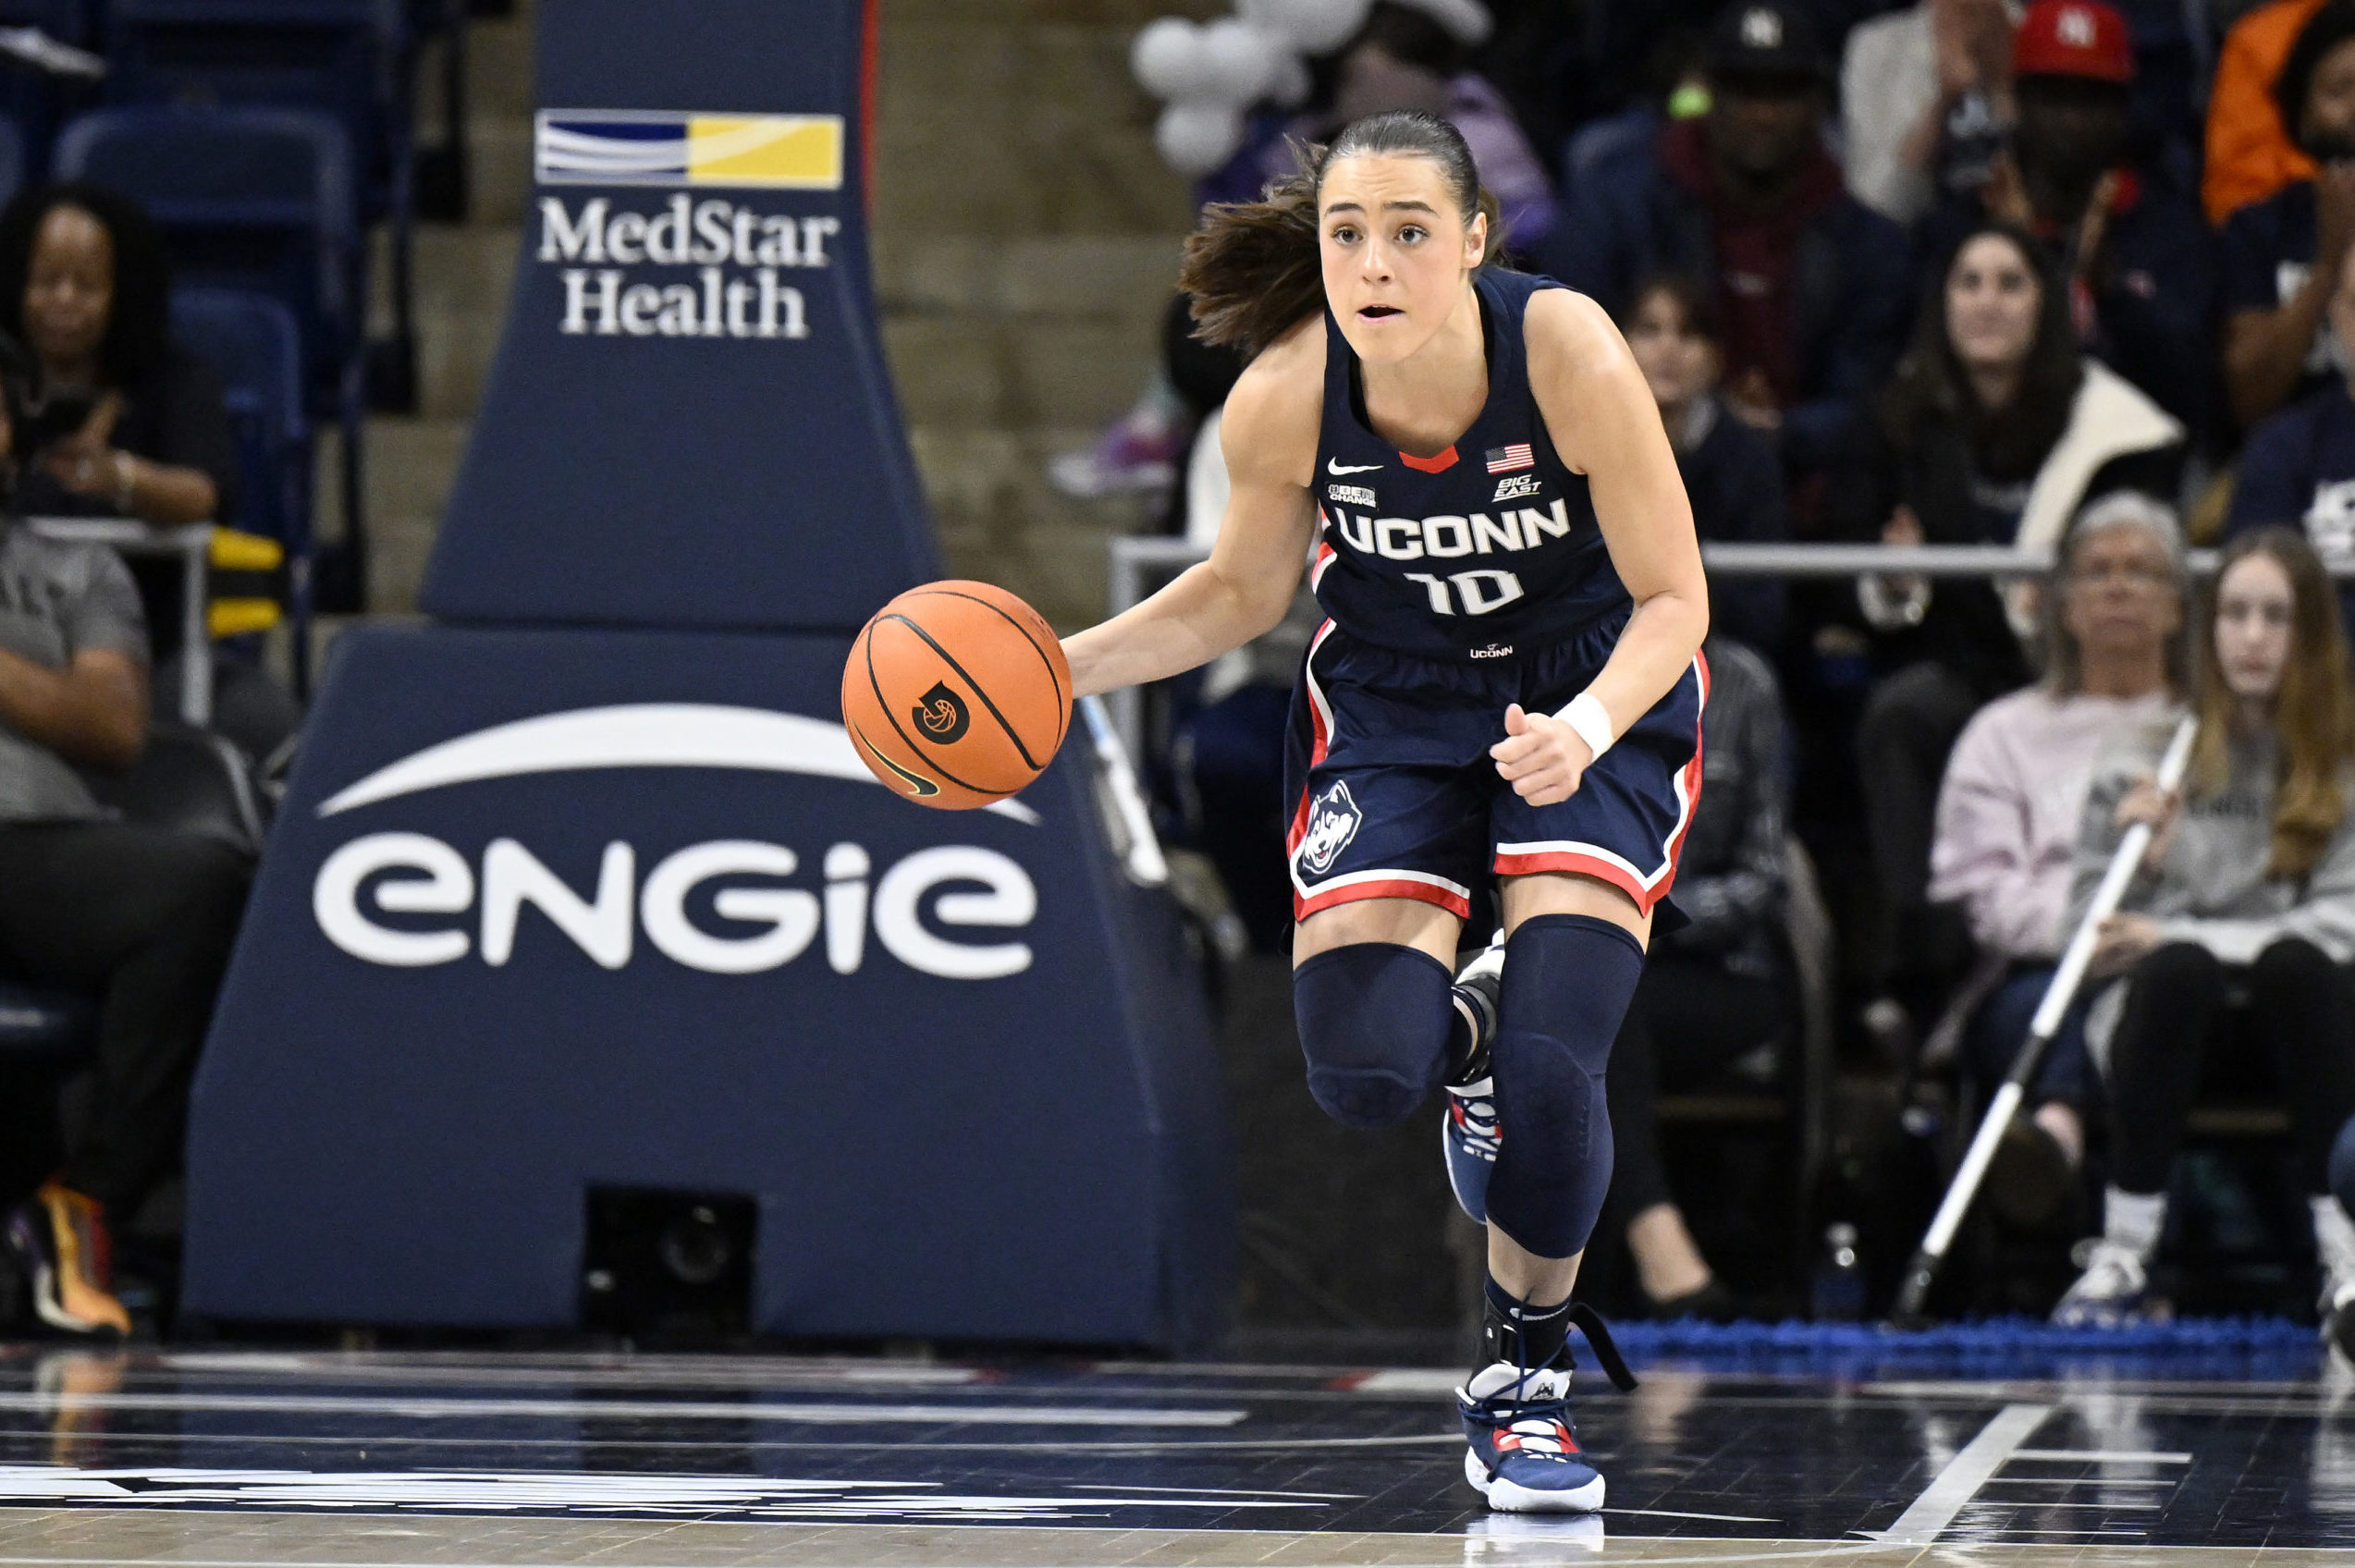 Nika Muhl continues to rise up UConn's record books despite grueling